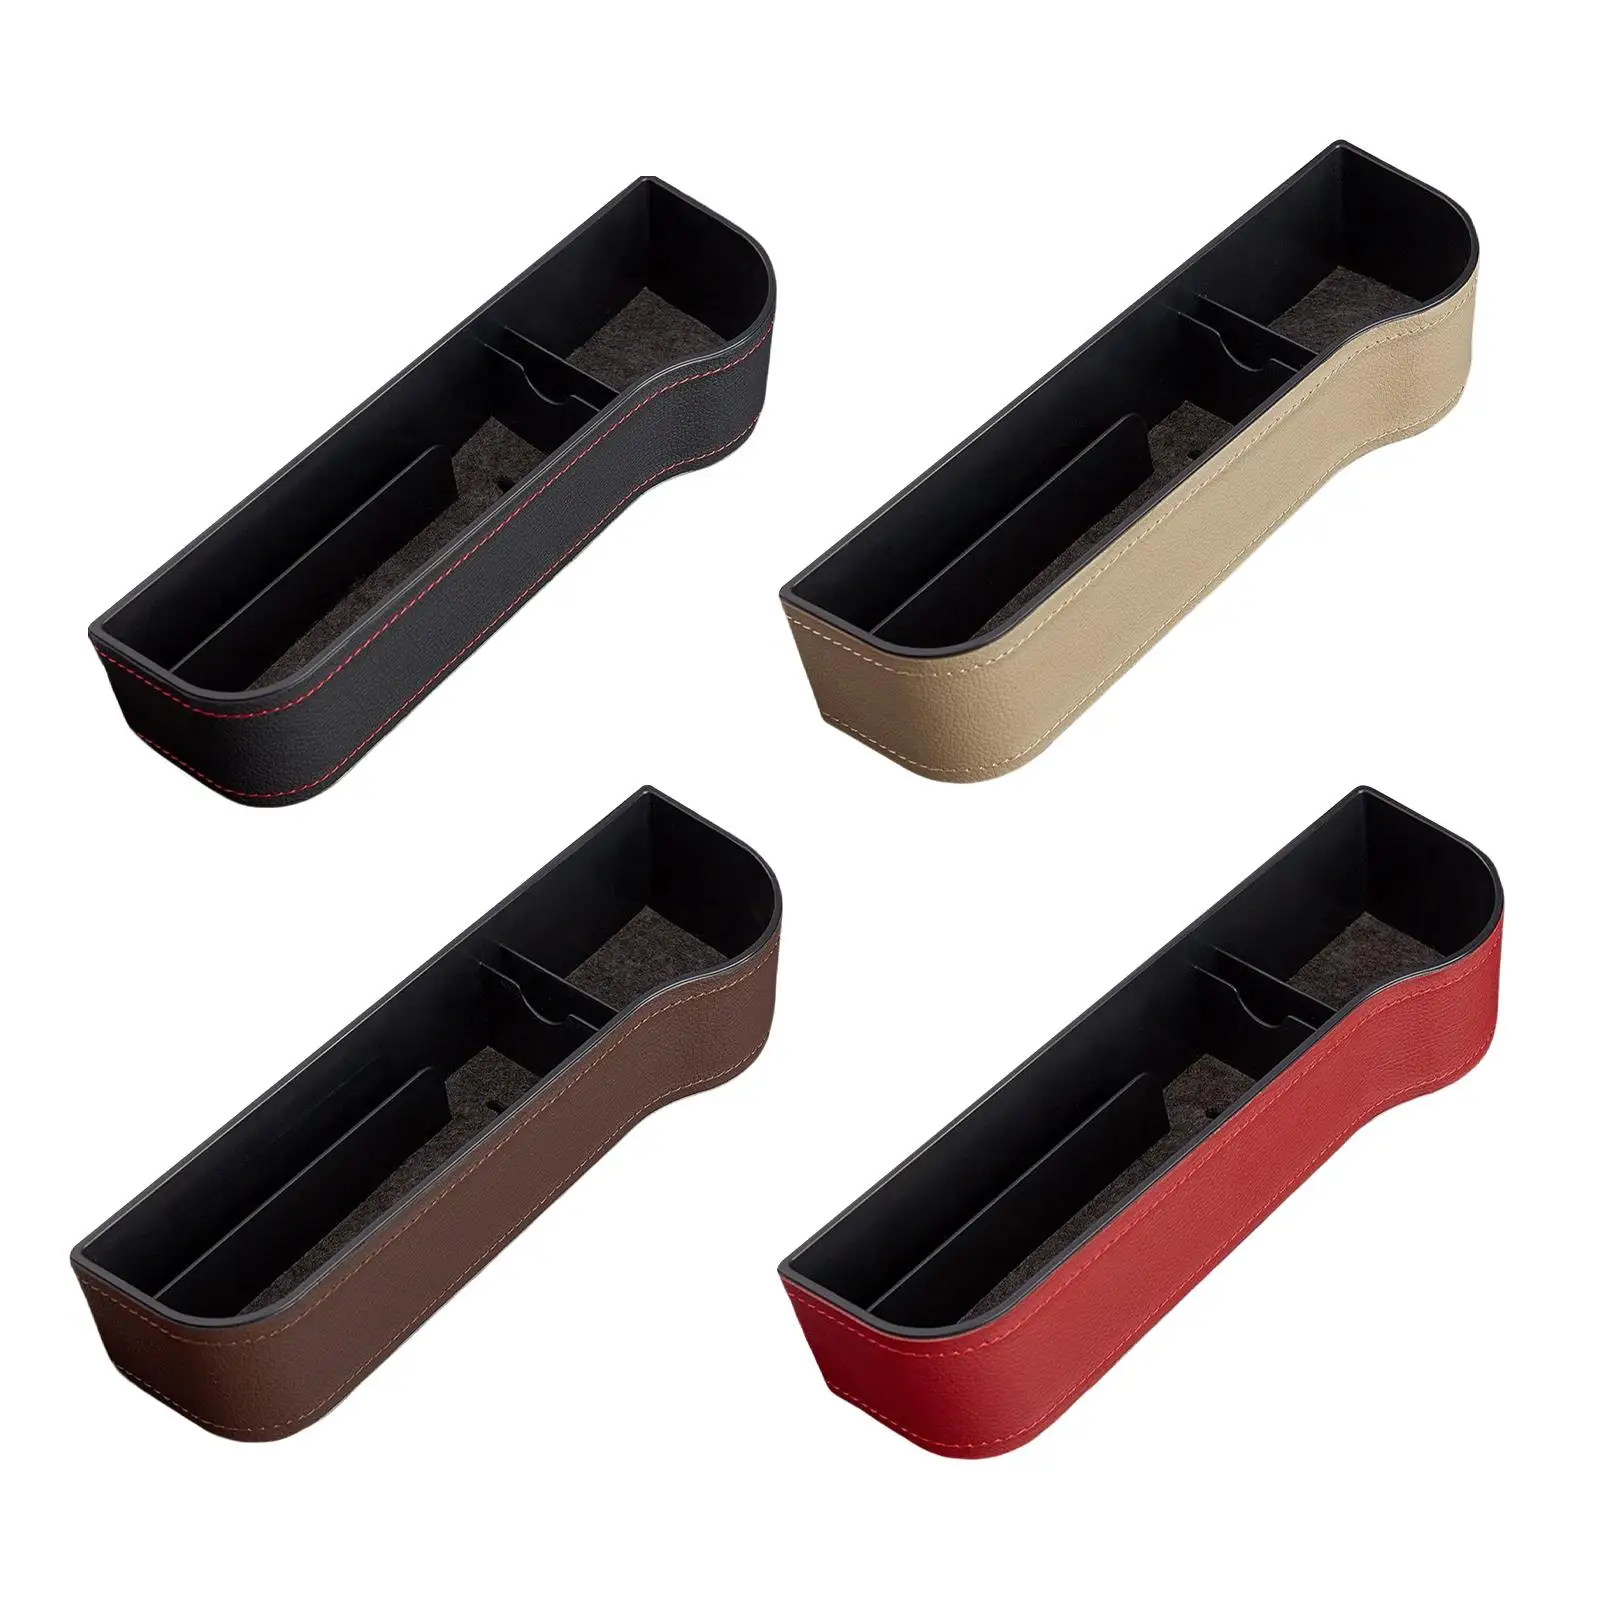 Car Seat Gap Filler PU Leather Auto Console Side Storage Box for Phones